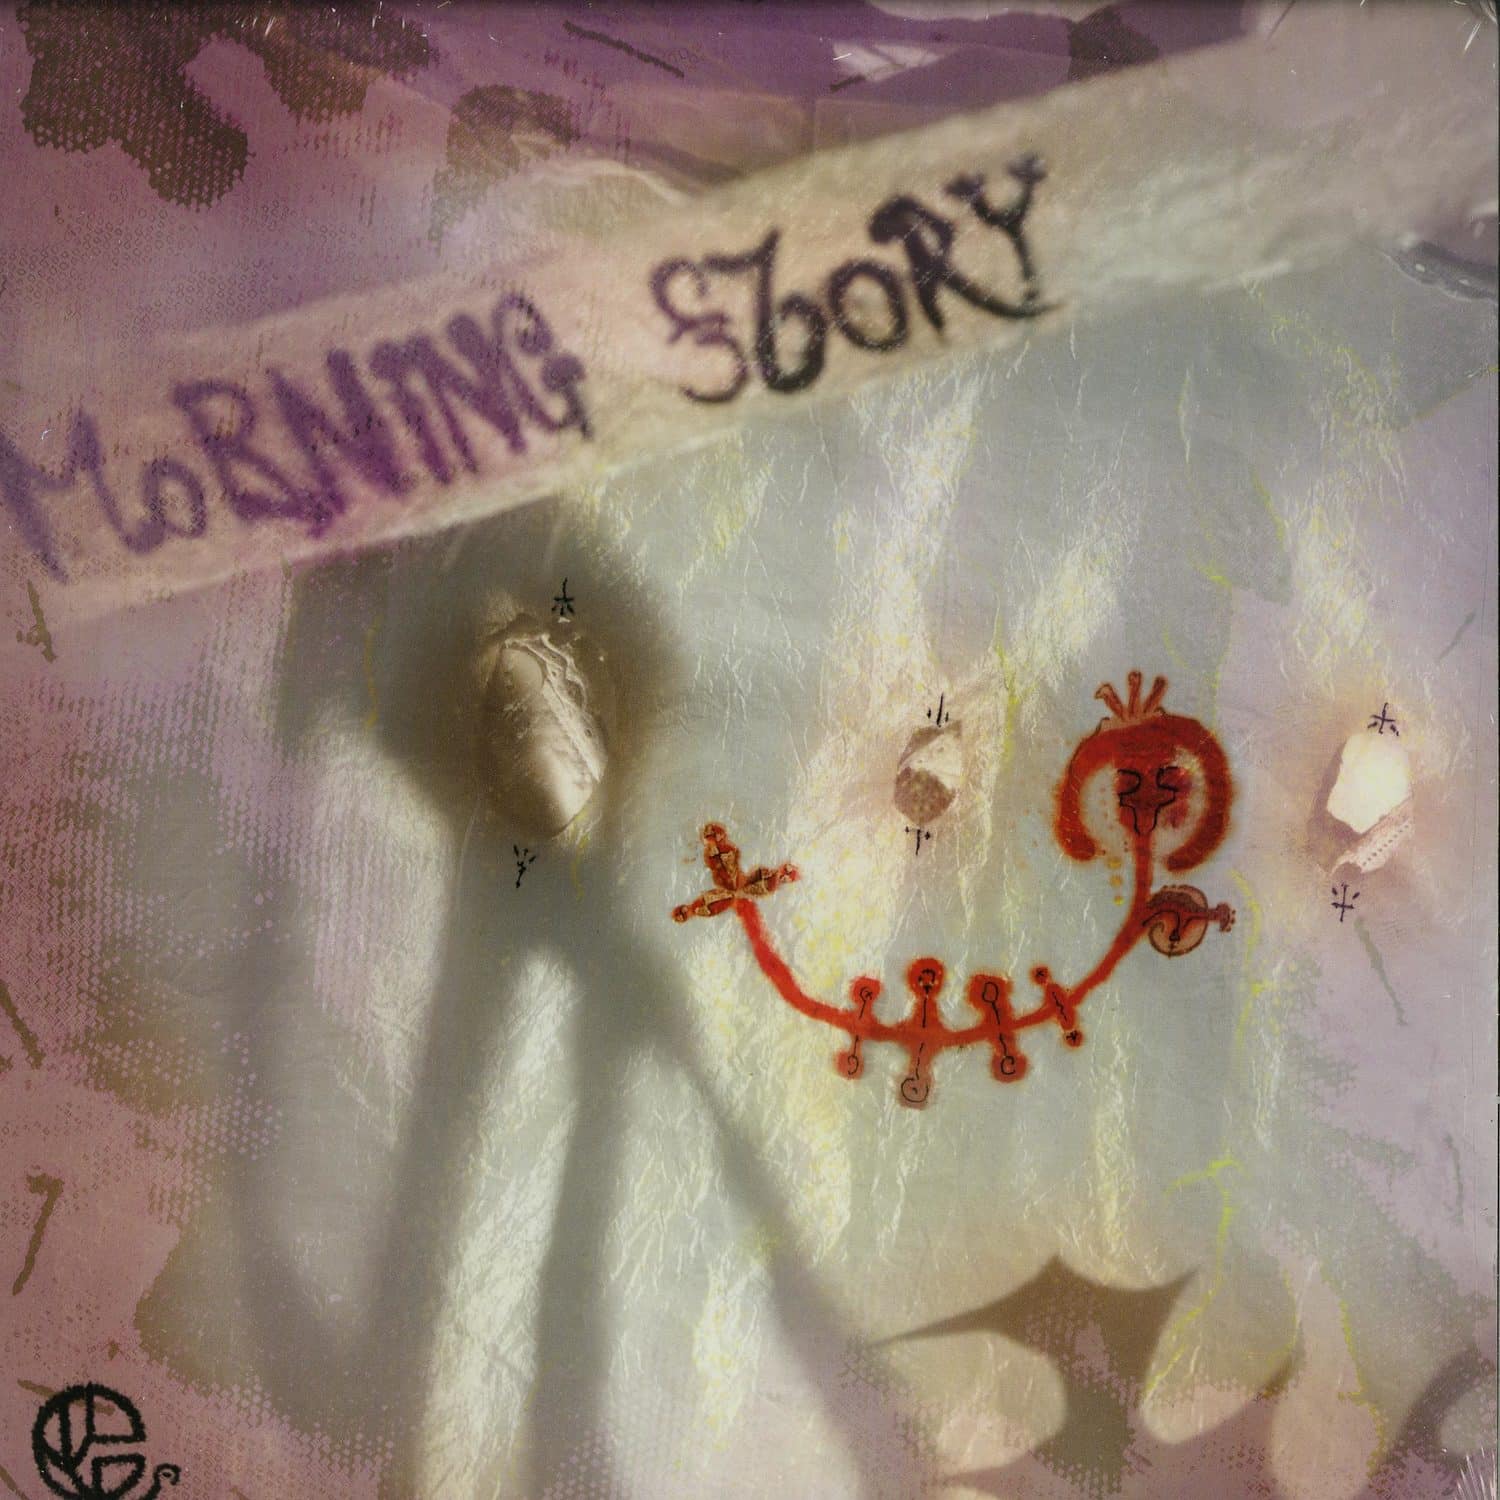 Toxe - MORNING STORY